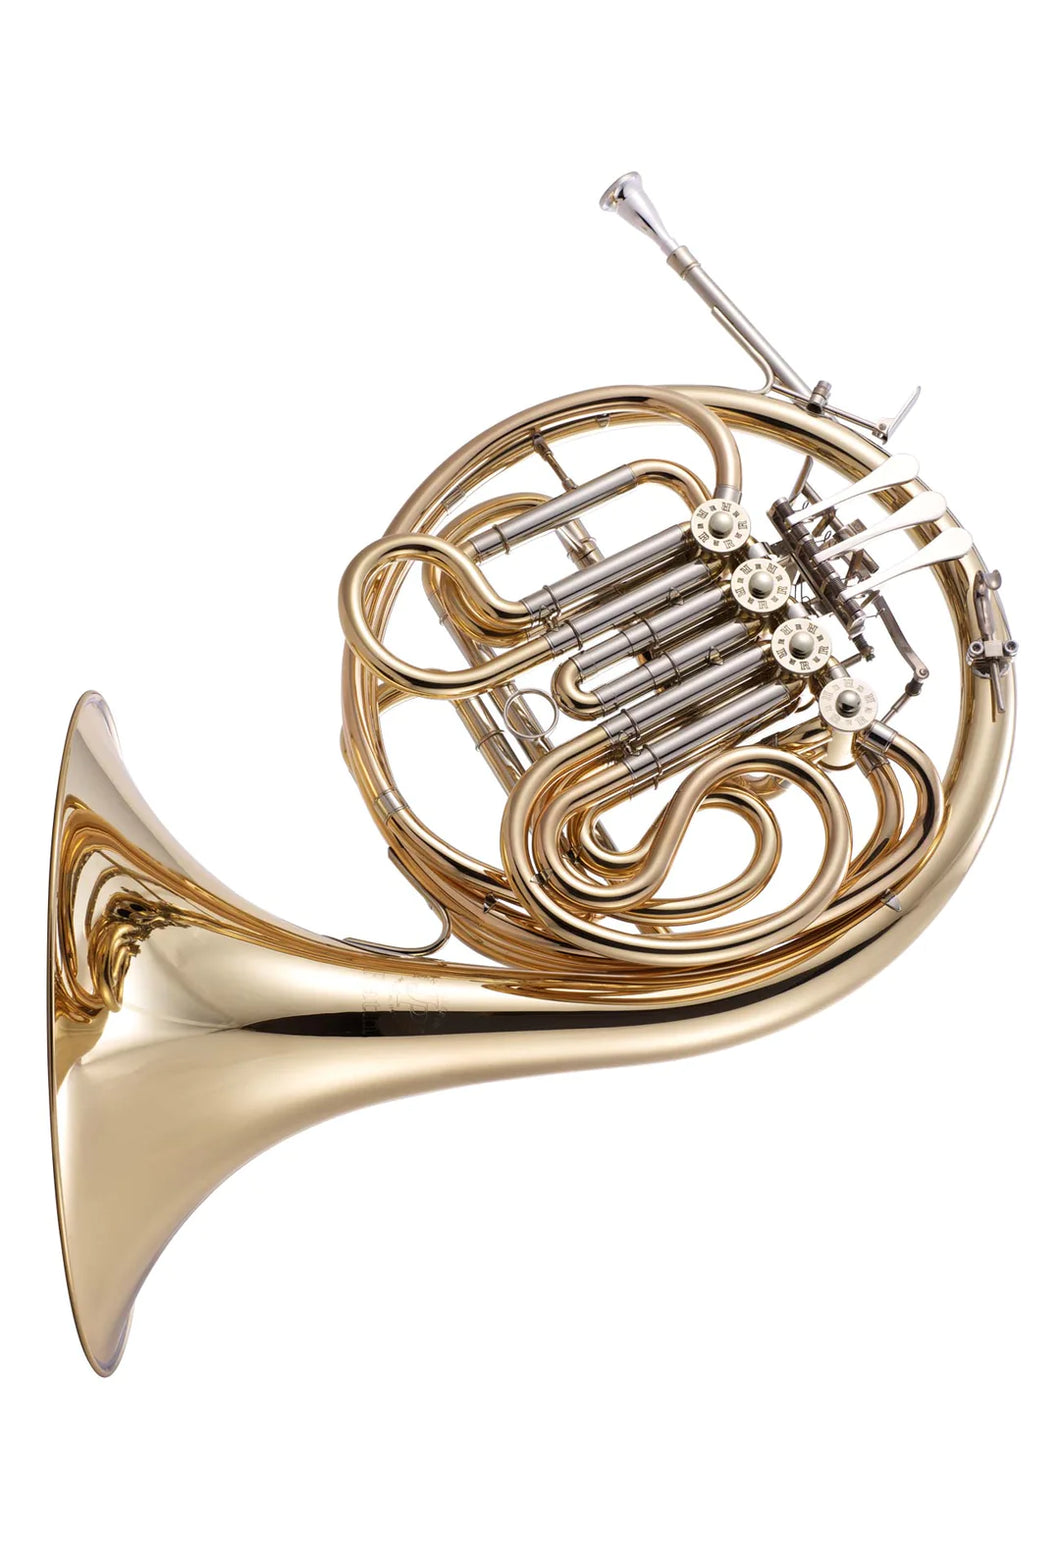 John Packer JP261R Rath Double Bb / F French Horn - Lacquer